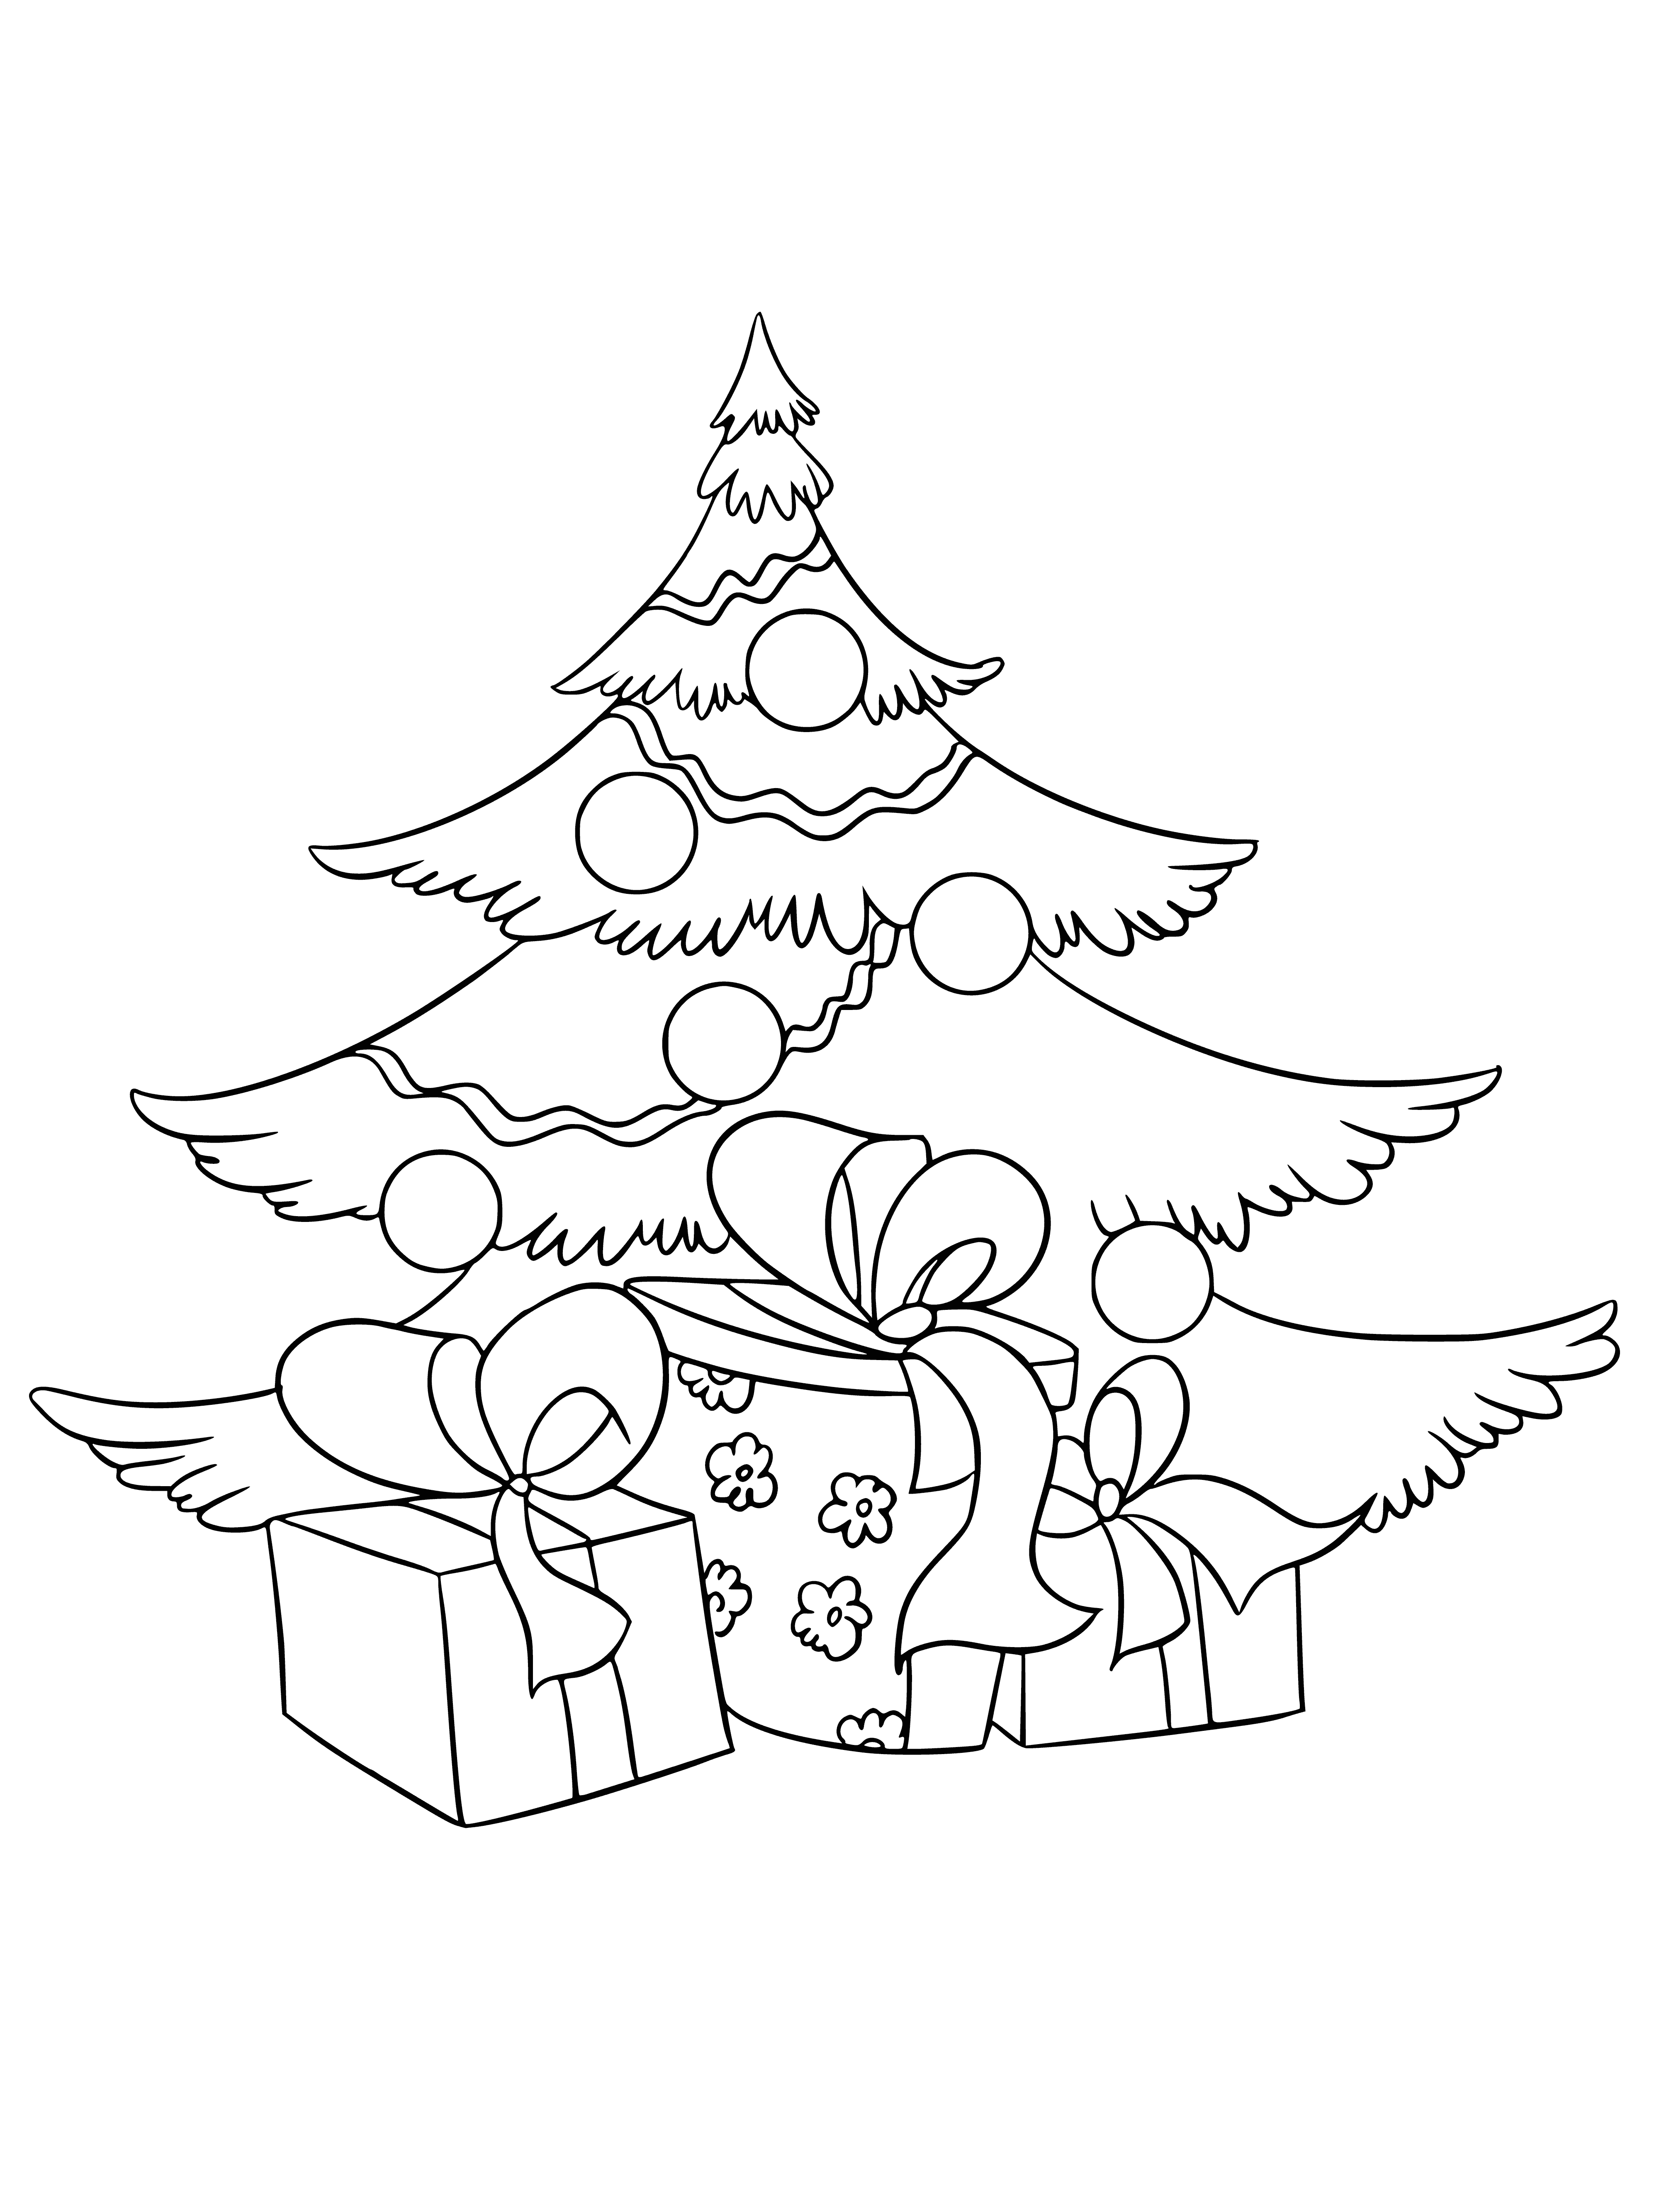 coloring page: A festive tree w/ a star is surrounded by presents wrapped in colorful paper, creating a cheerful Christmas scene.